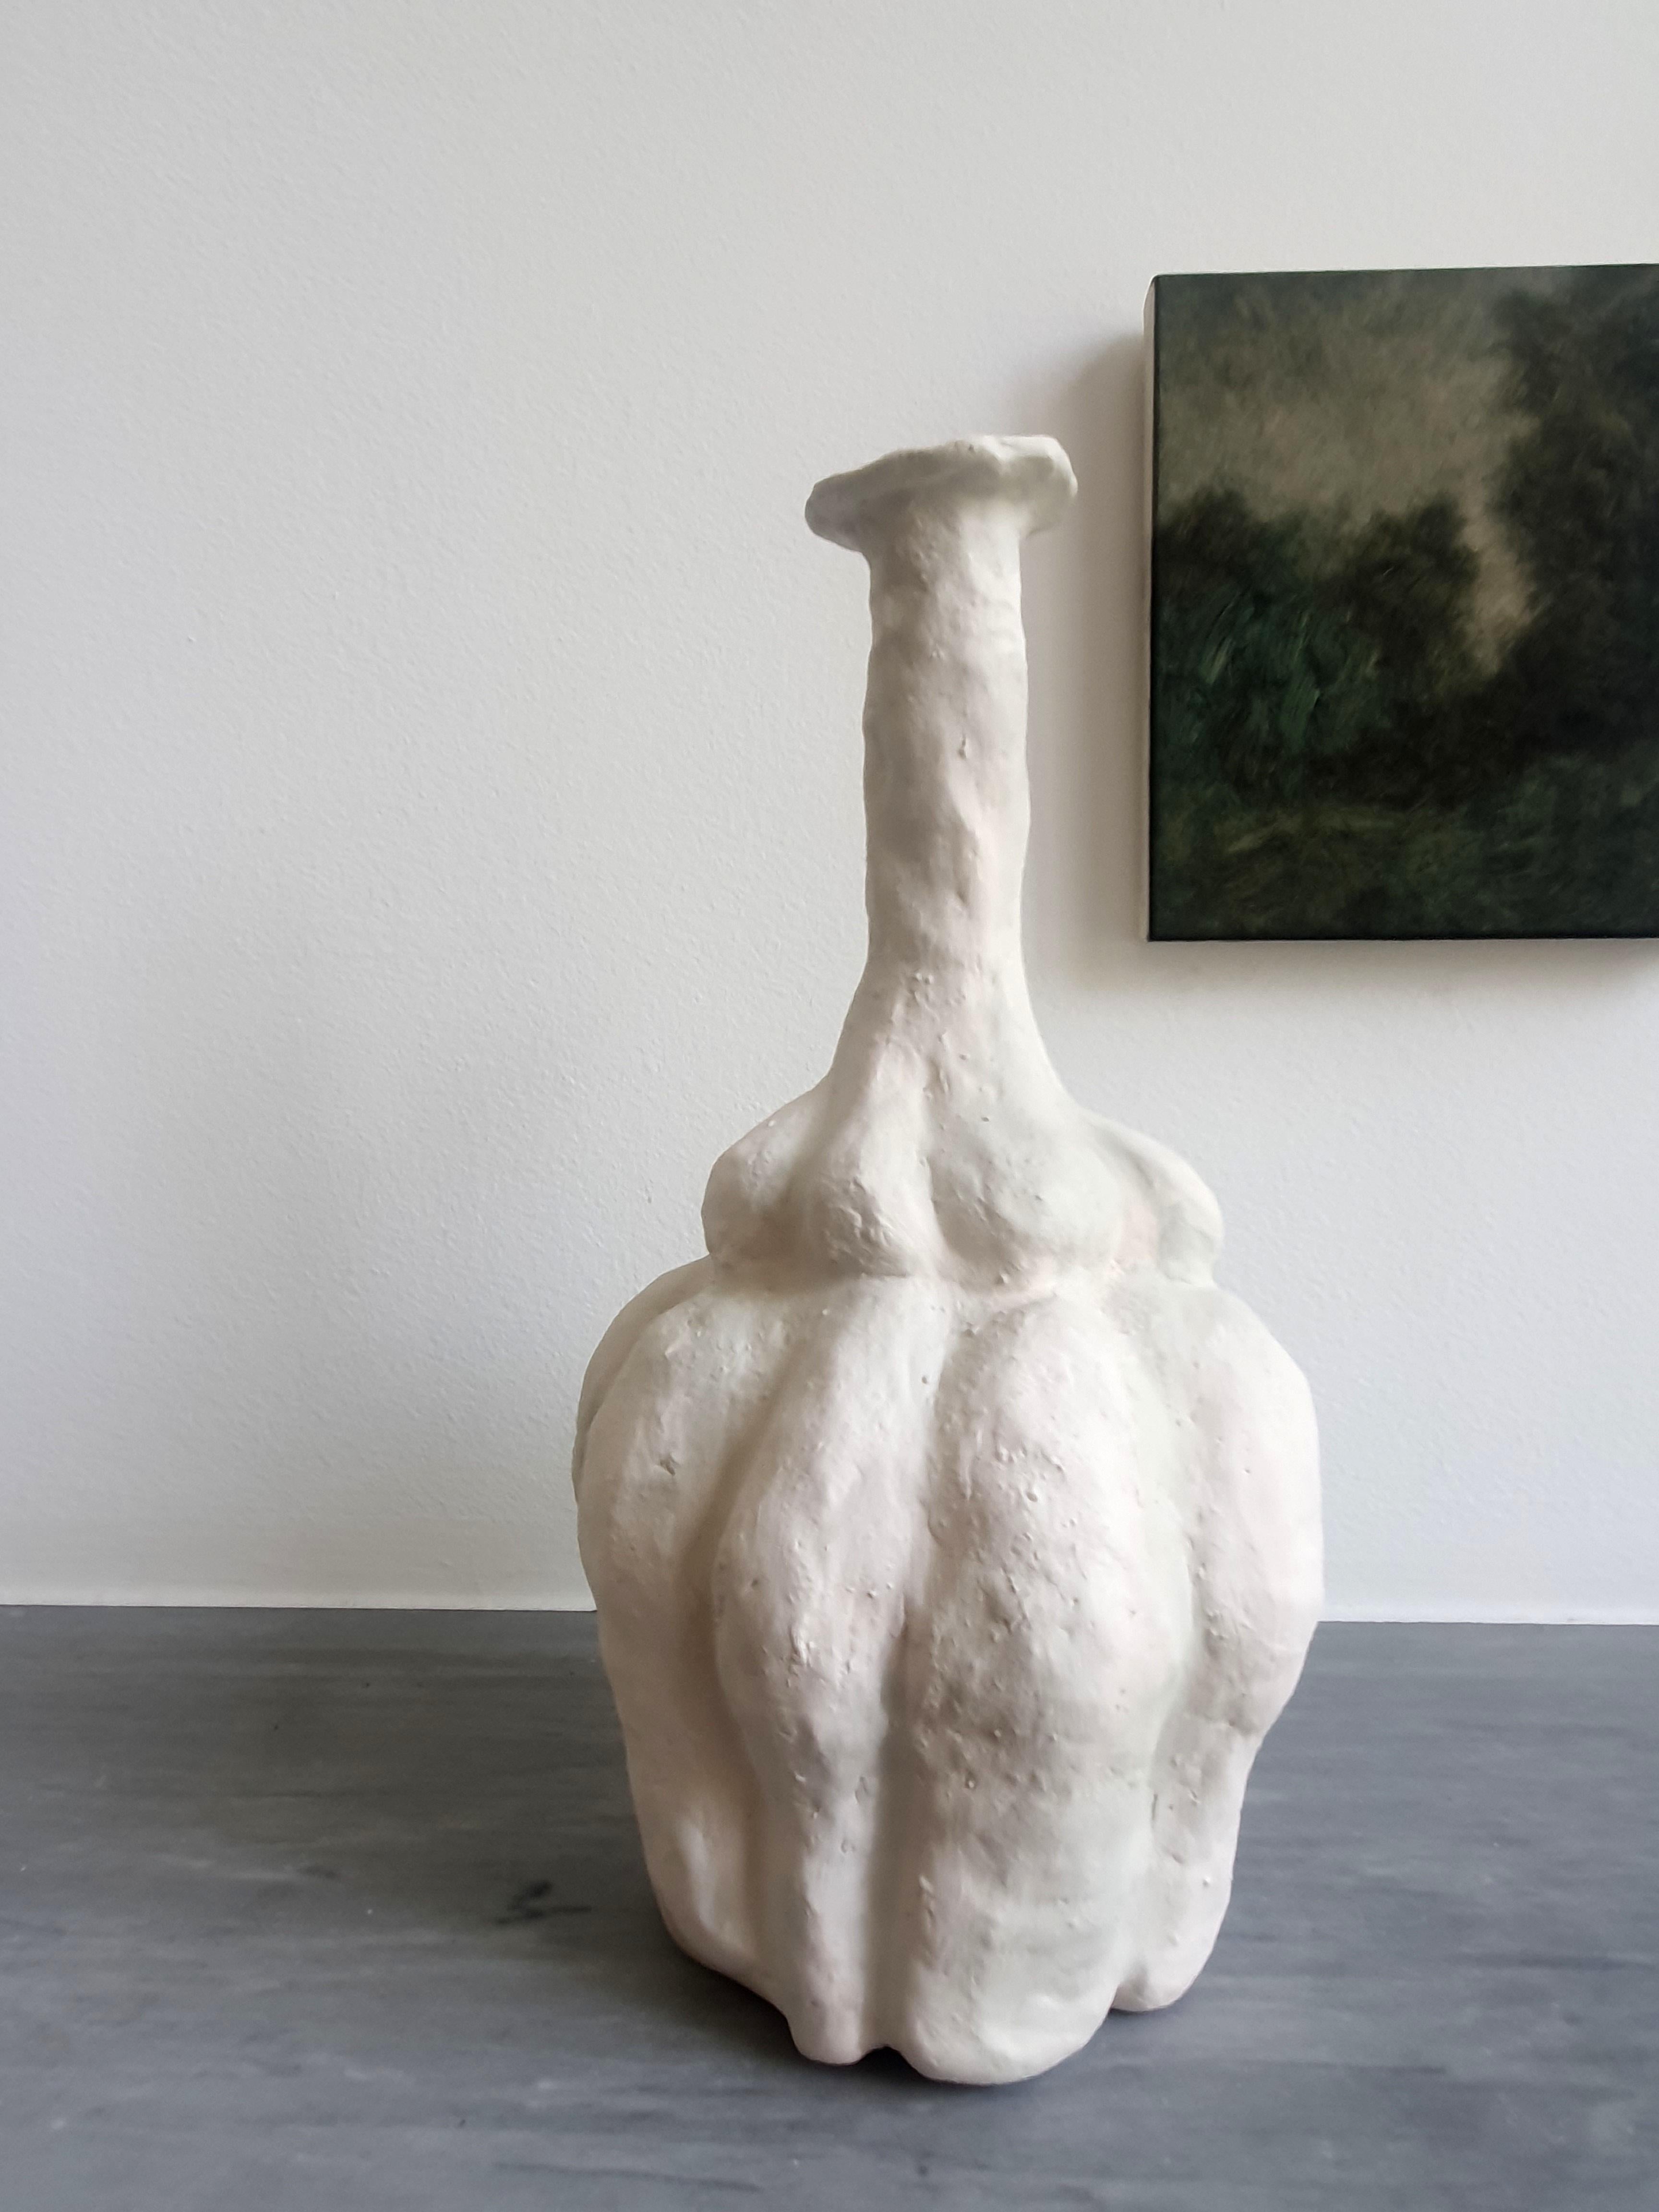 Cream Morandi vase by Adèle Clèves
Dimensions: D 17 x W 17 x H 31 cm
Materials: Ceramic.

Adèle Clèves was born in Paris in 1989, after studying in the Beaux Arts and Archeology at the Sorbonne, she specialized in ceramic creations.
Inspired by